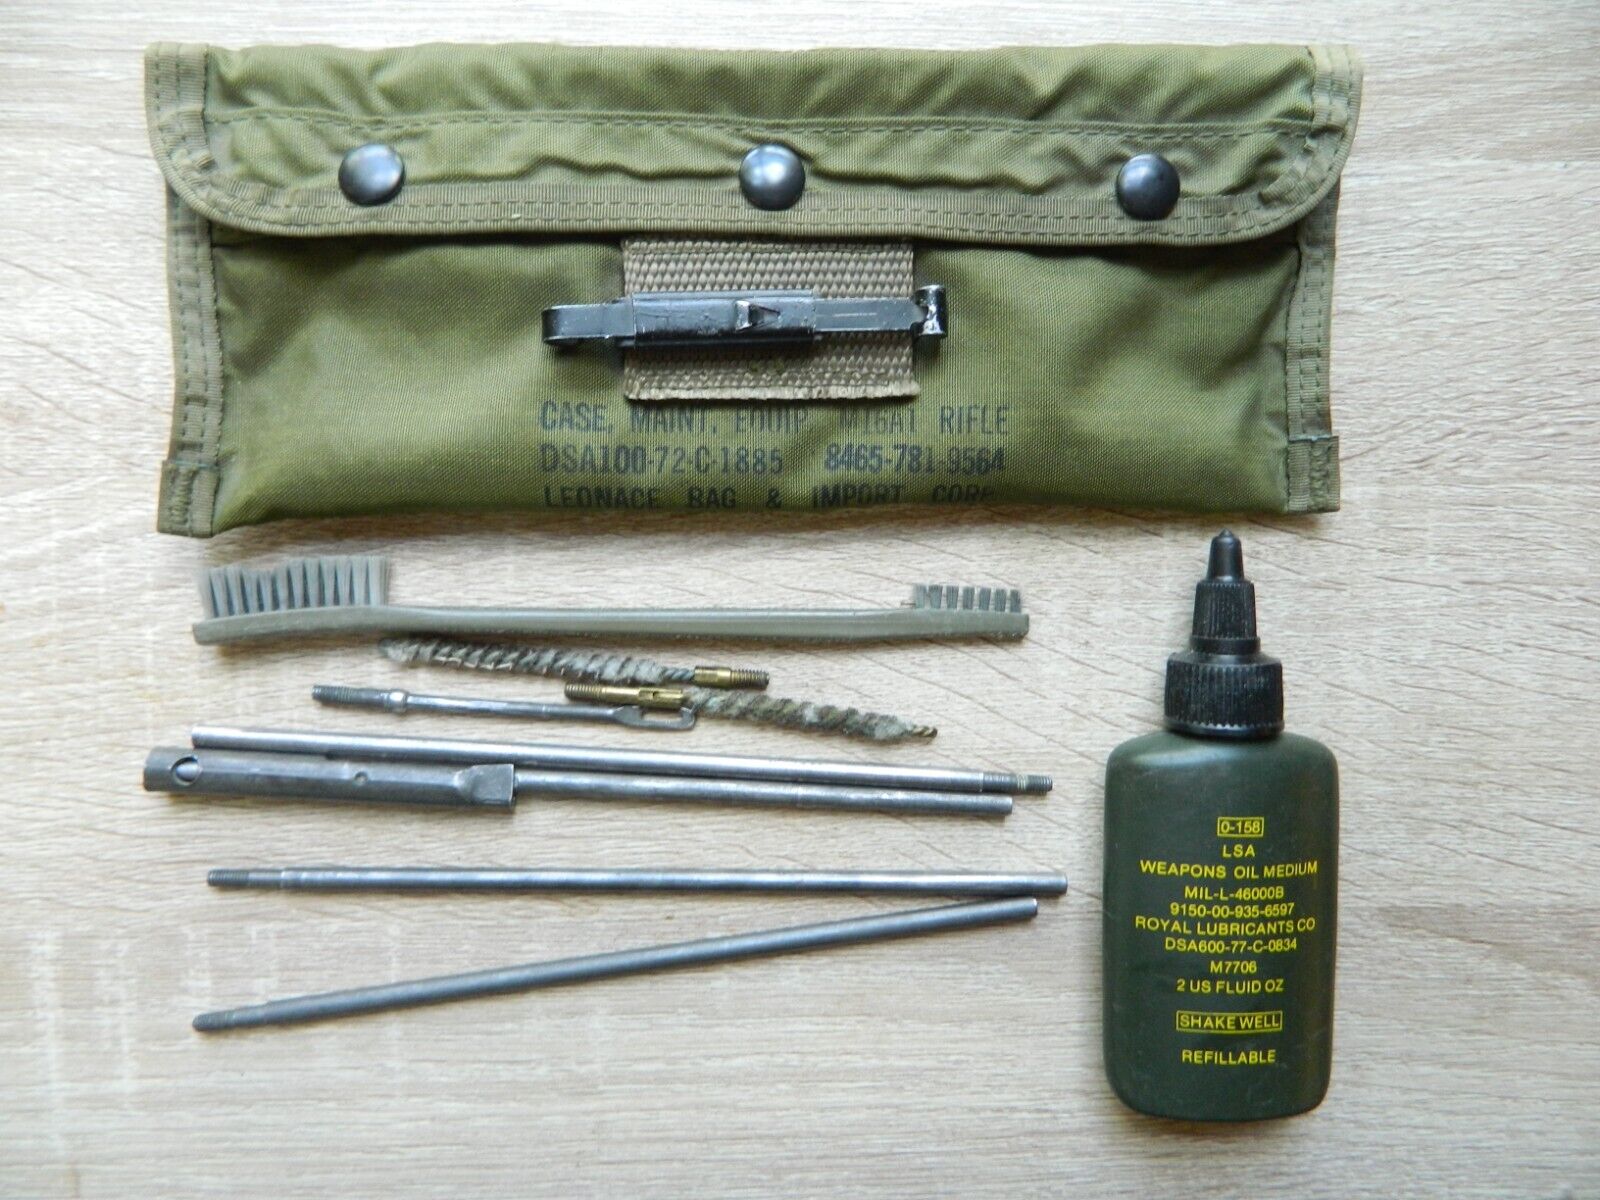 Vintage 1972 M16A1 Military Rifle Equipment Maintenance Case with cleaning tools